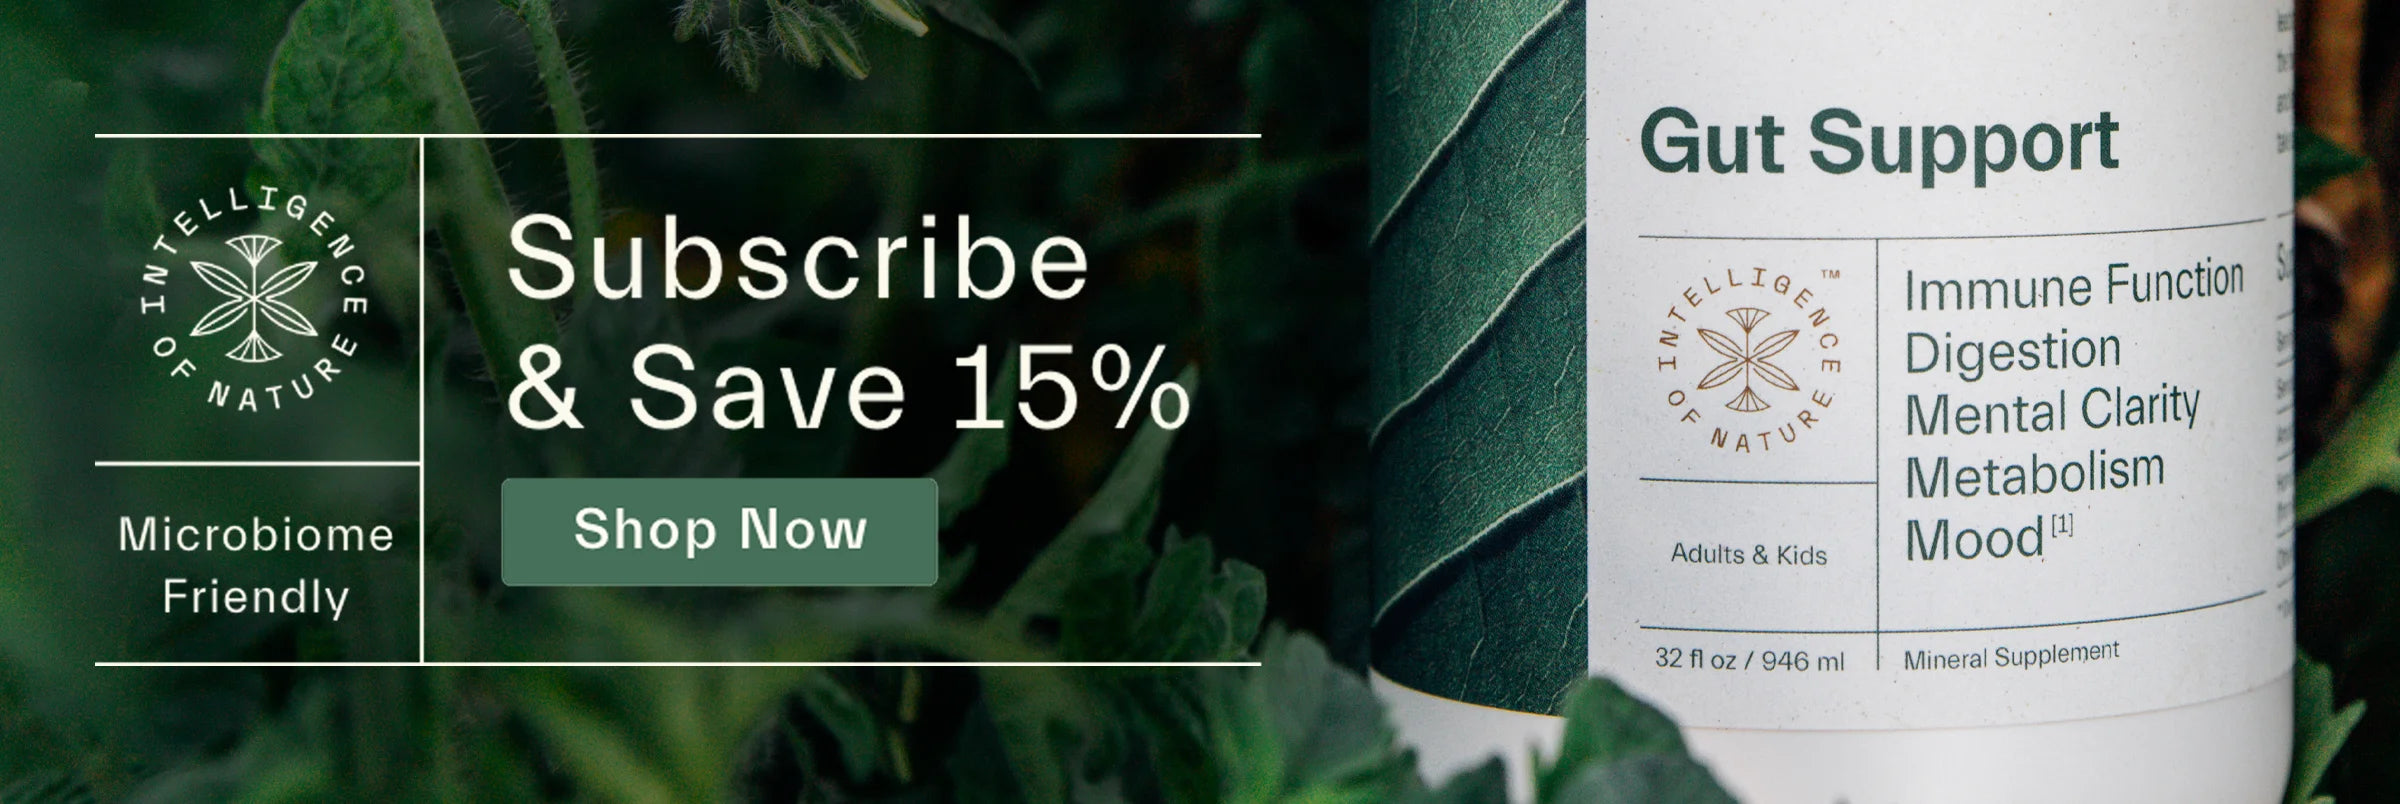 subscribe and save on ION*